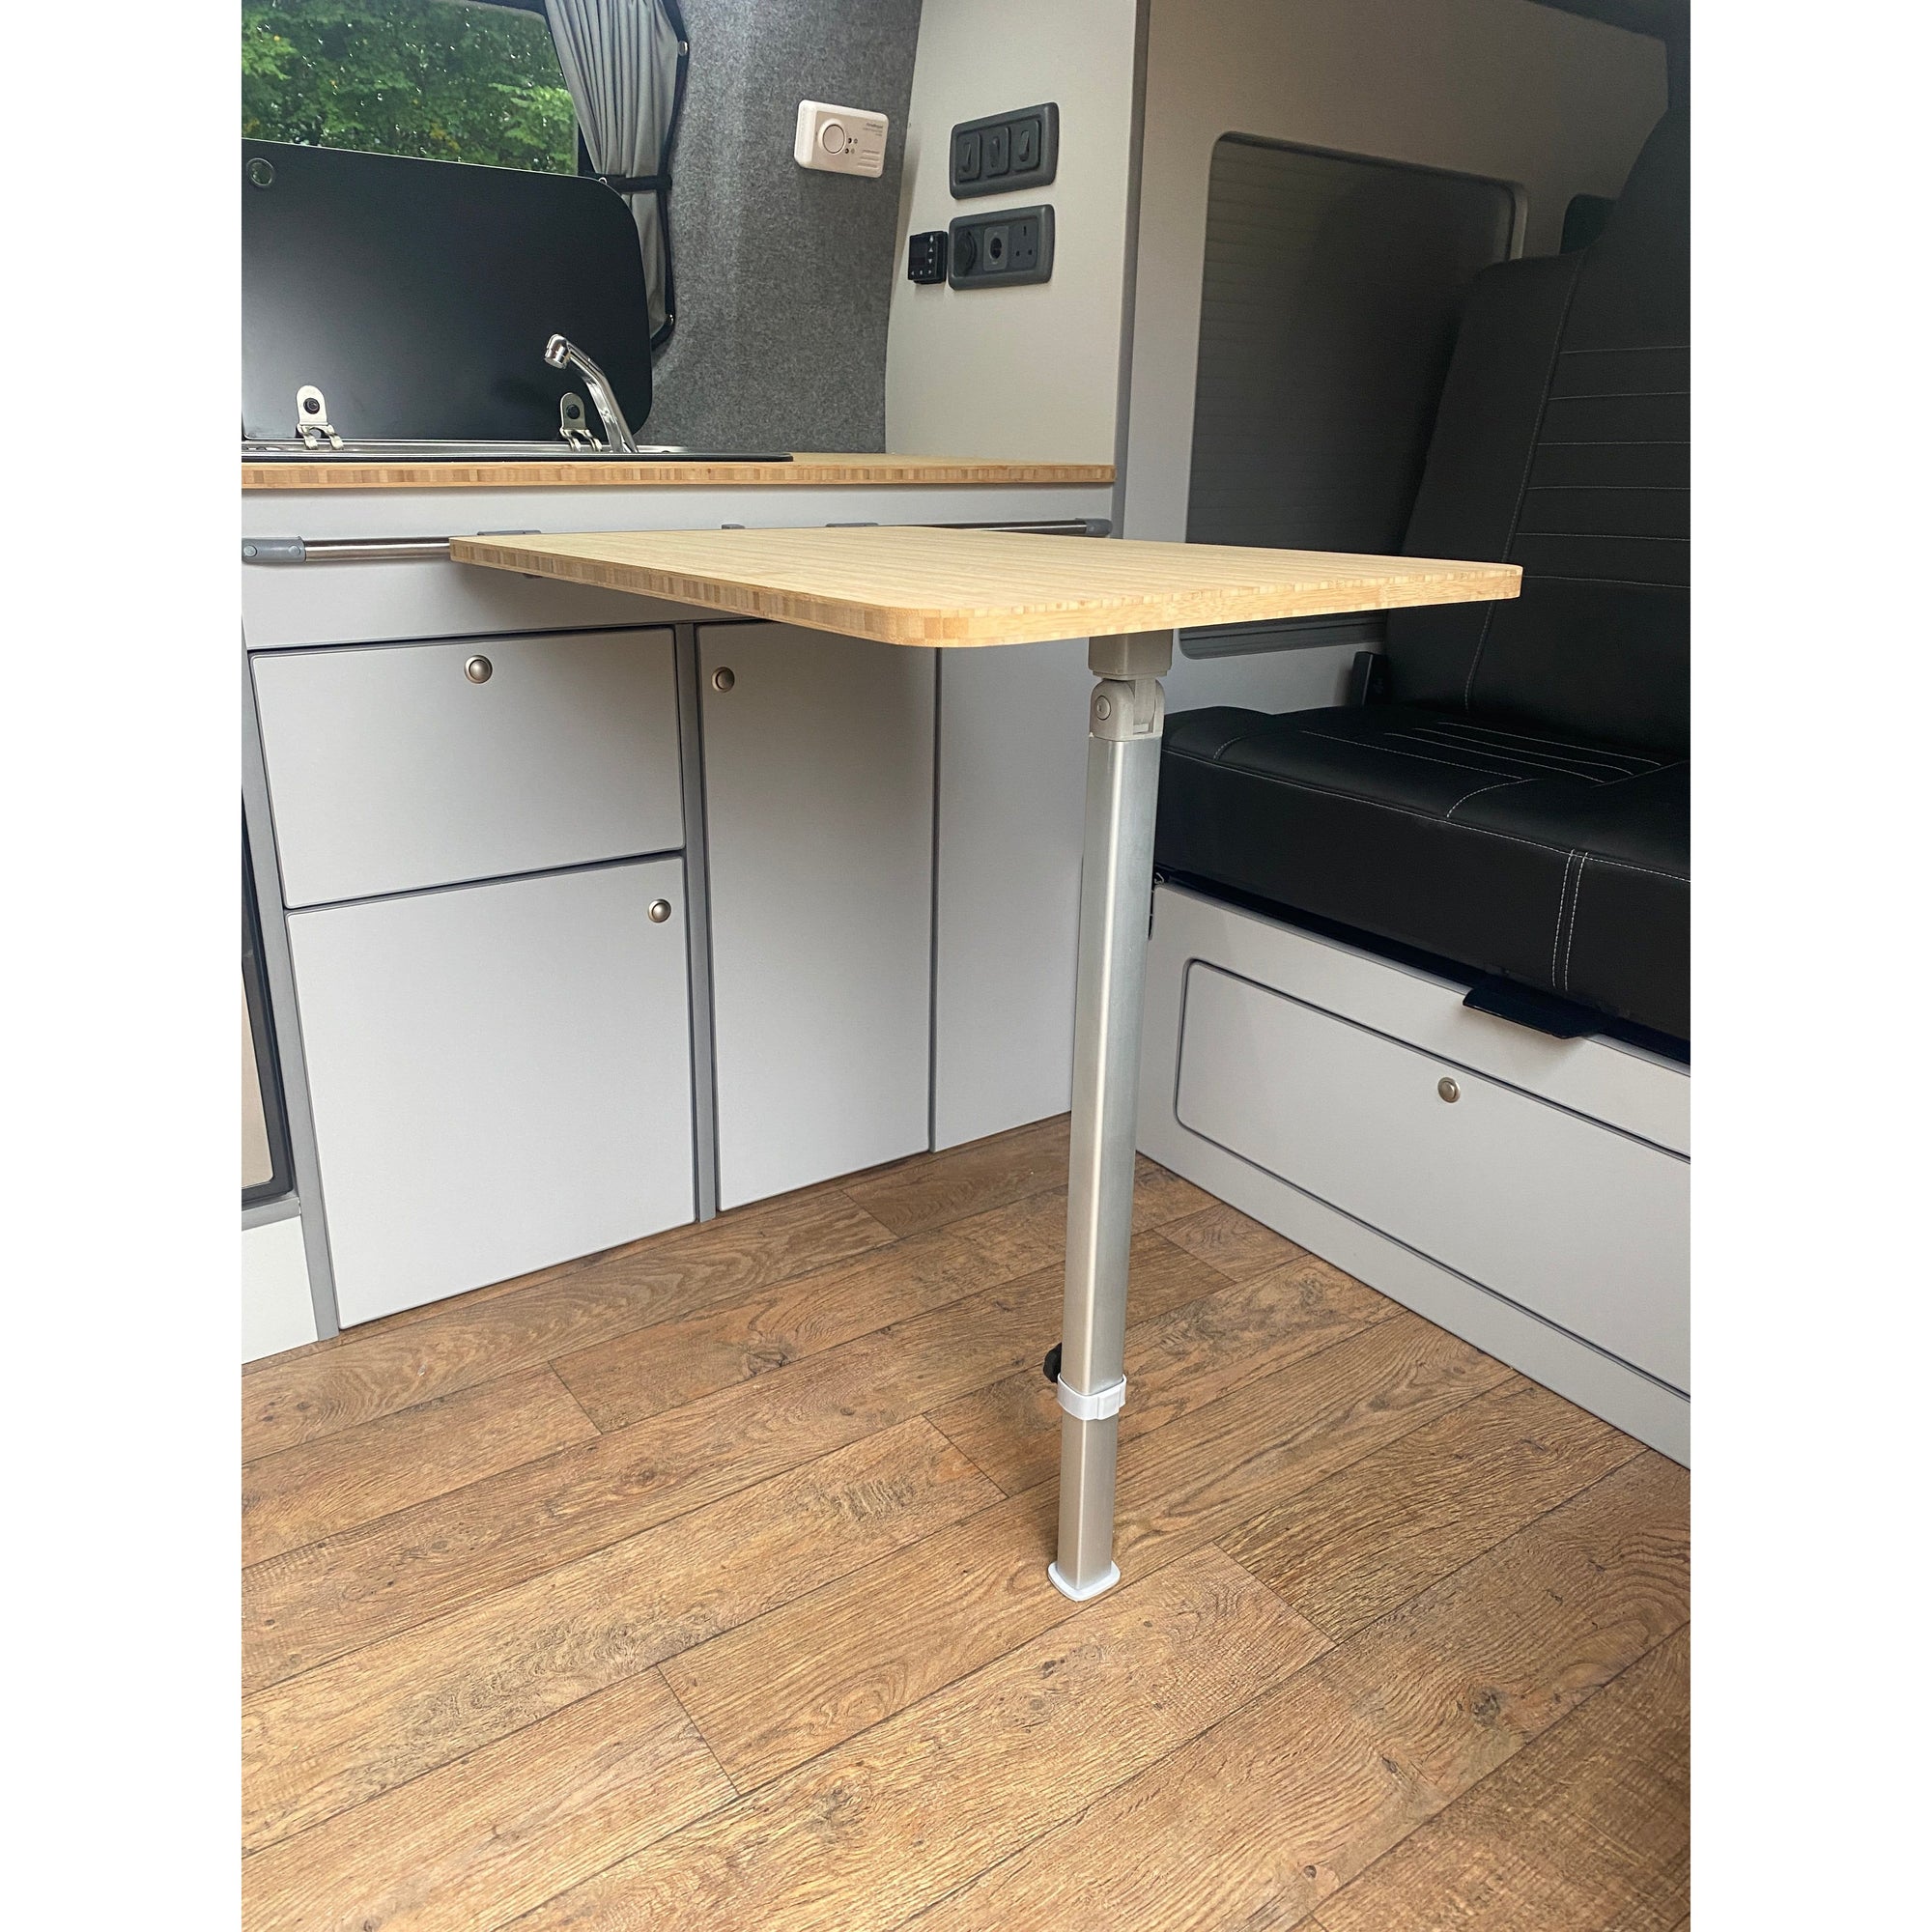 Bamboo kitchen top and table (optional) for U shape furniture VanGo Campers